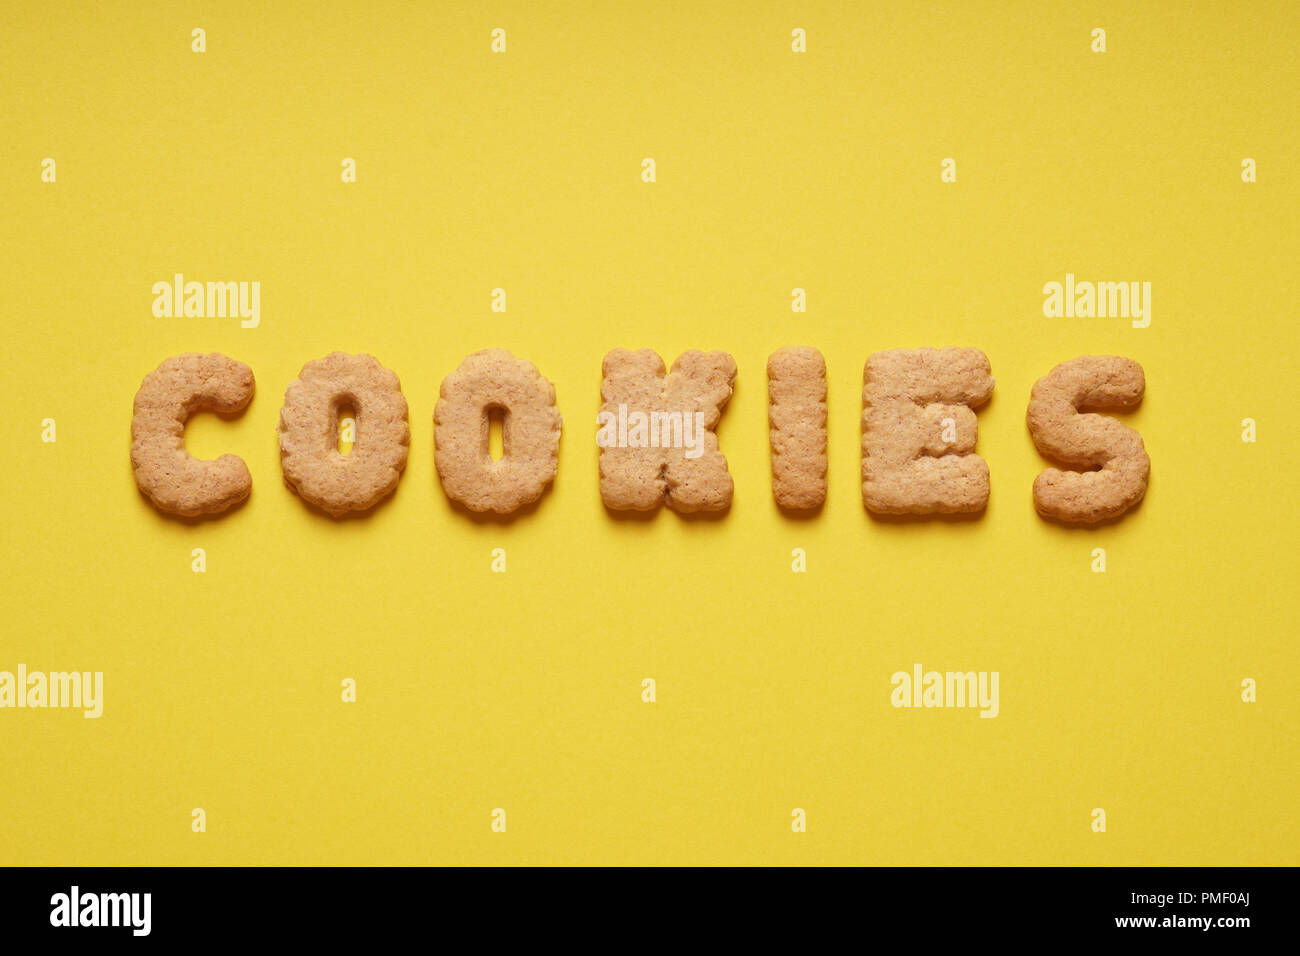 cookies word spelled out with cookie letters or characters on yellow paper background Stock Photo